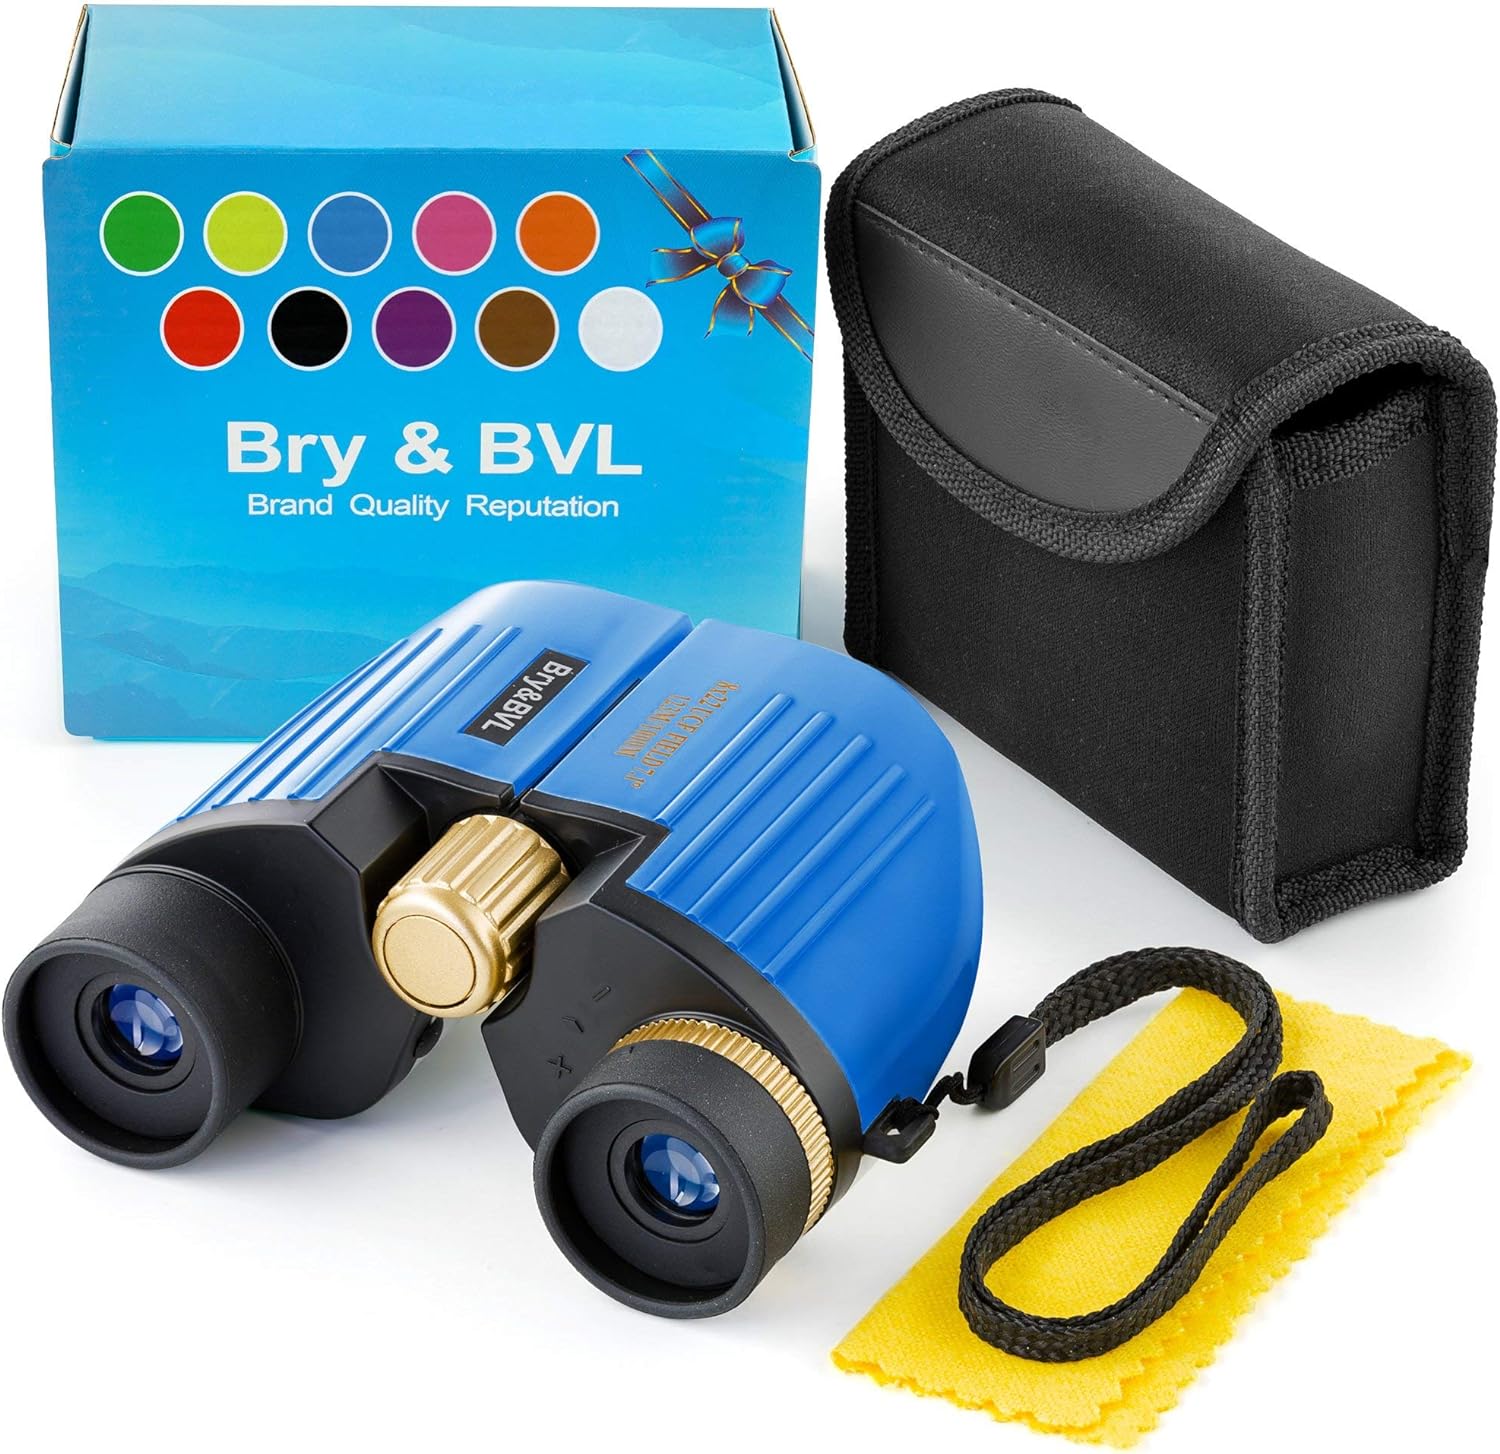 Binoculars for Kids - High Resolution, Shockproof – 8X22 Kids Binoculars for Bird Watching, Best Toys for Boys, Girls – Real Optics Set for Outdoor Toddler Games – Detective and Spy Kids Toys